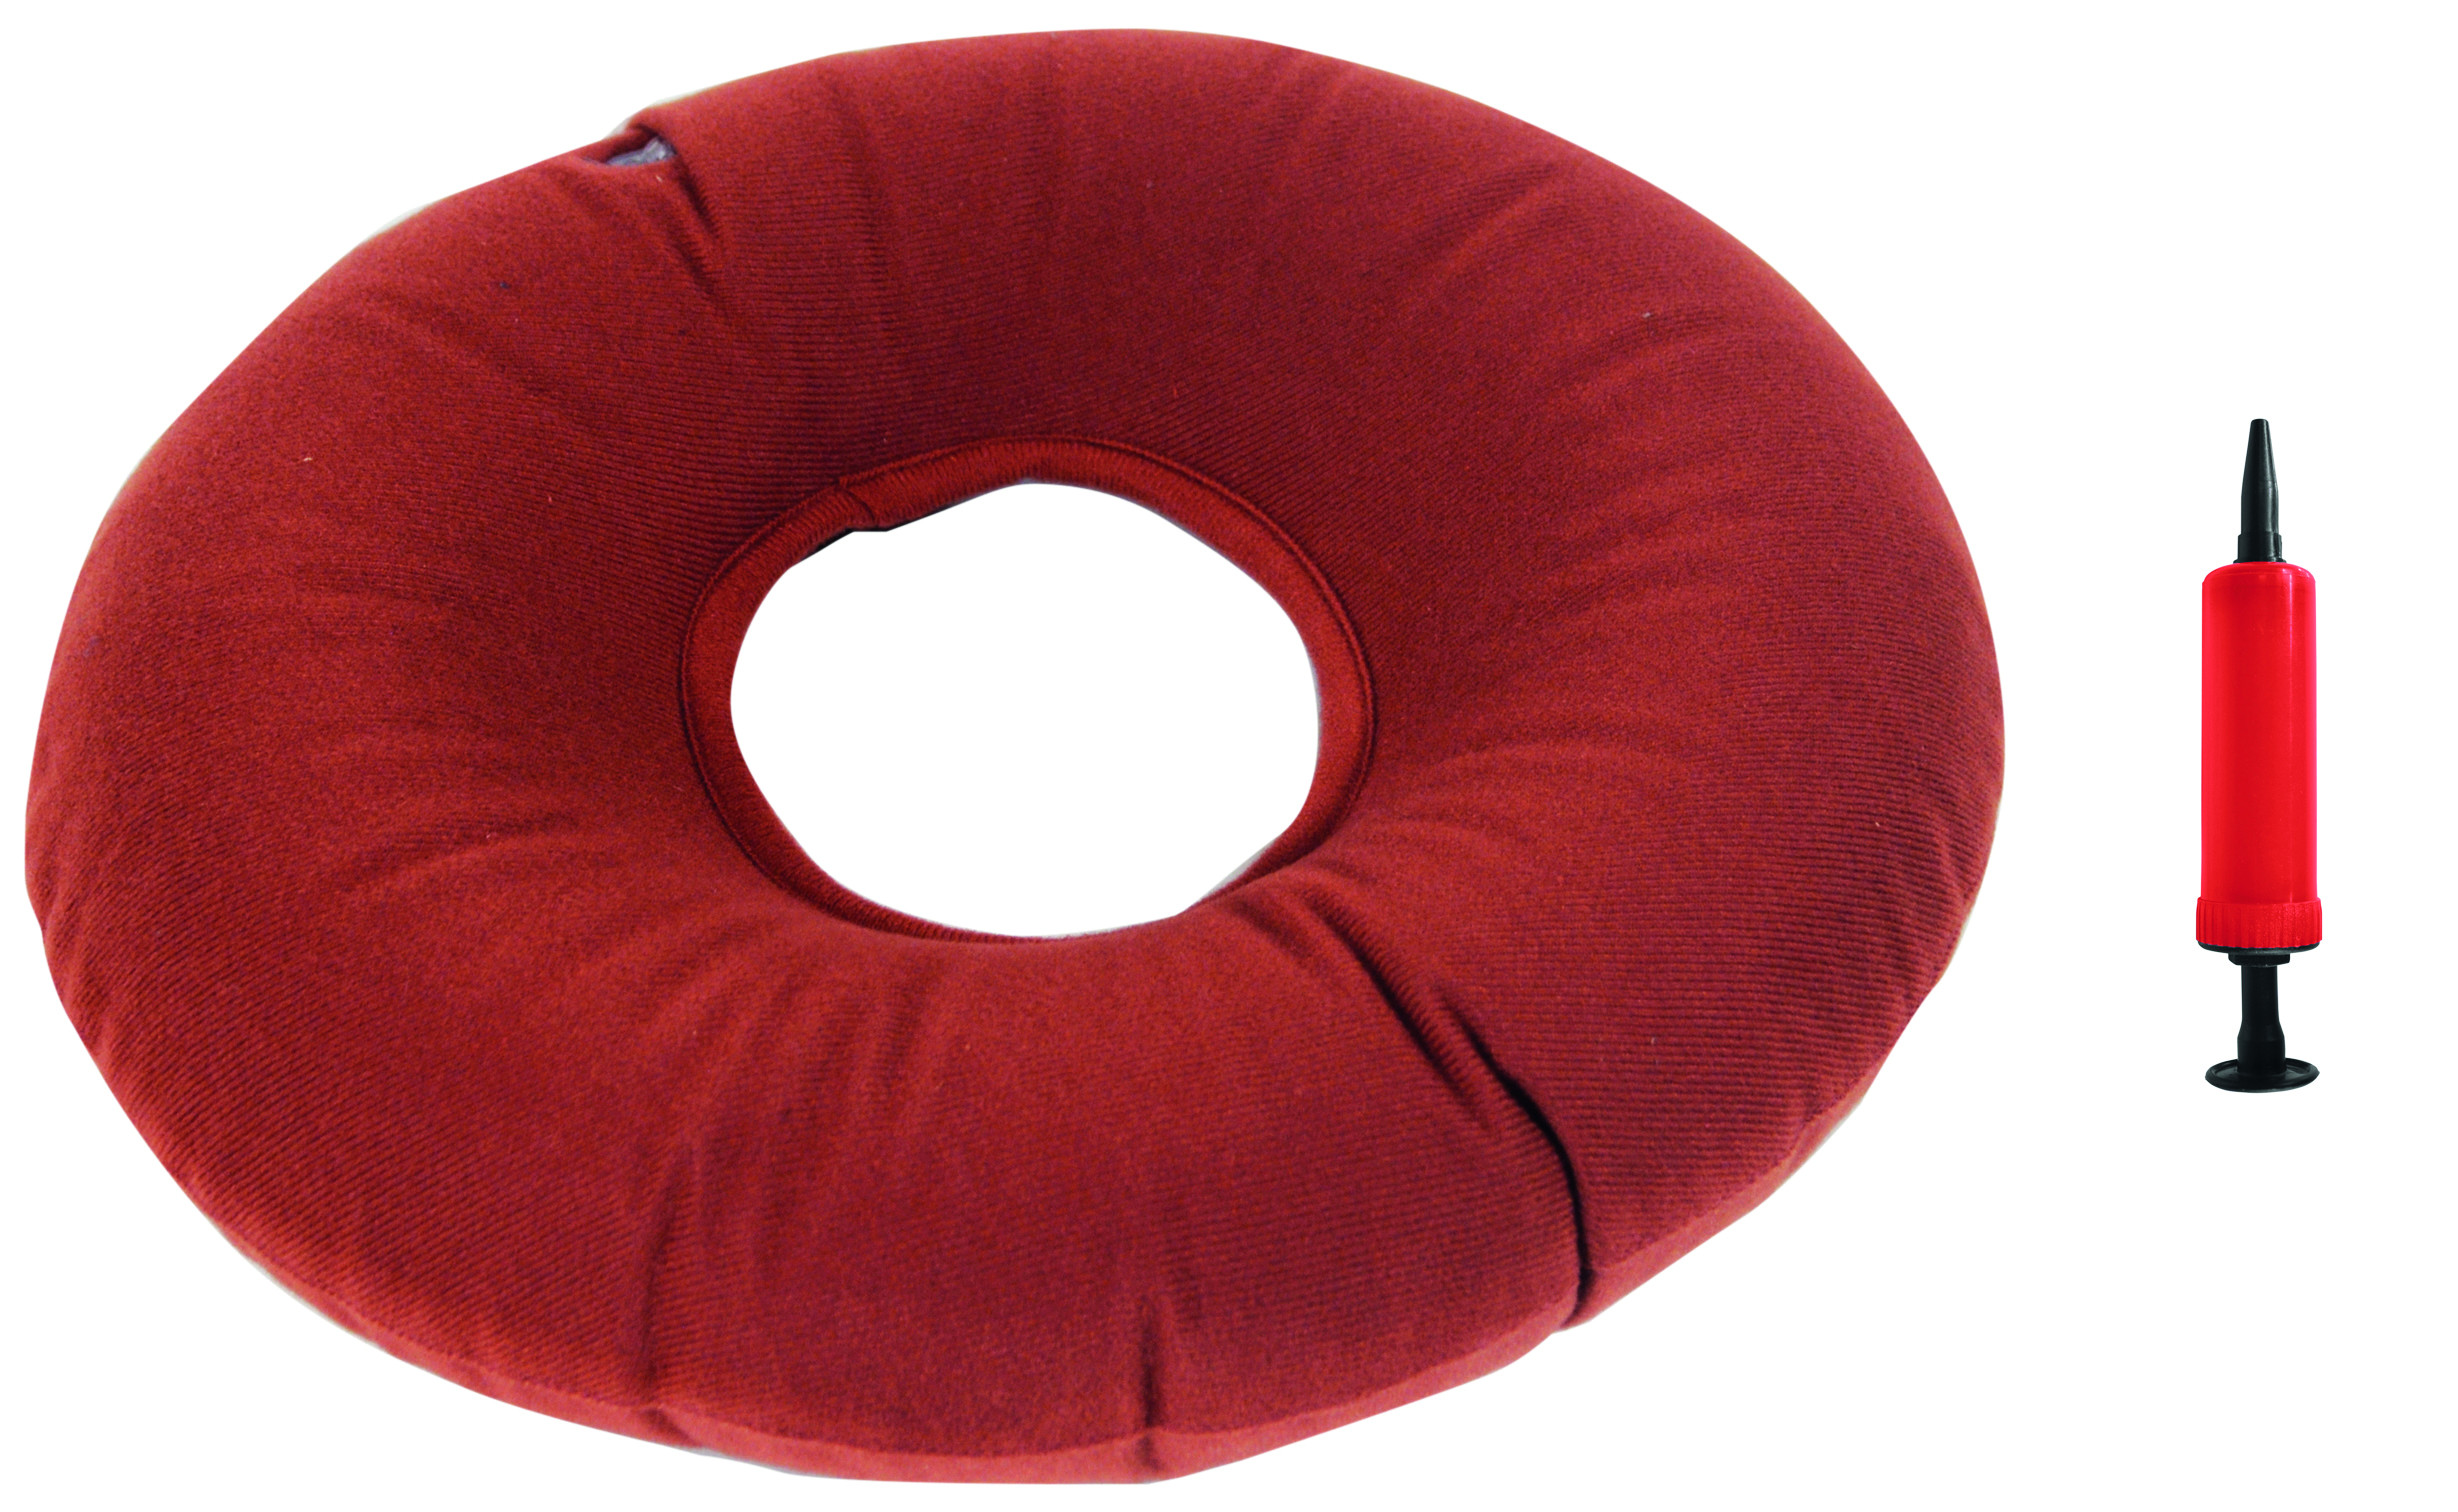 COUSSIN BOUEE ANTI-COMPRESSION GONFLABLE